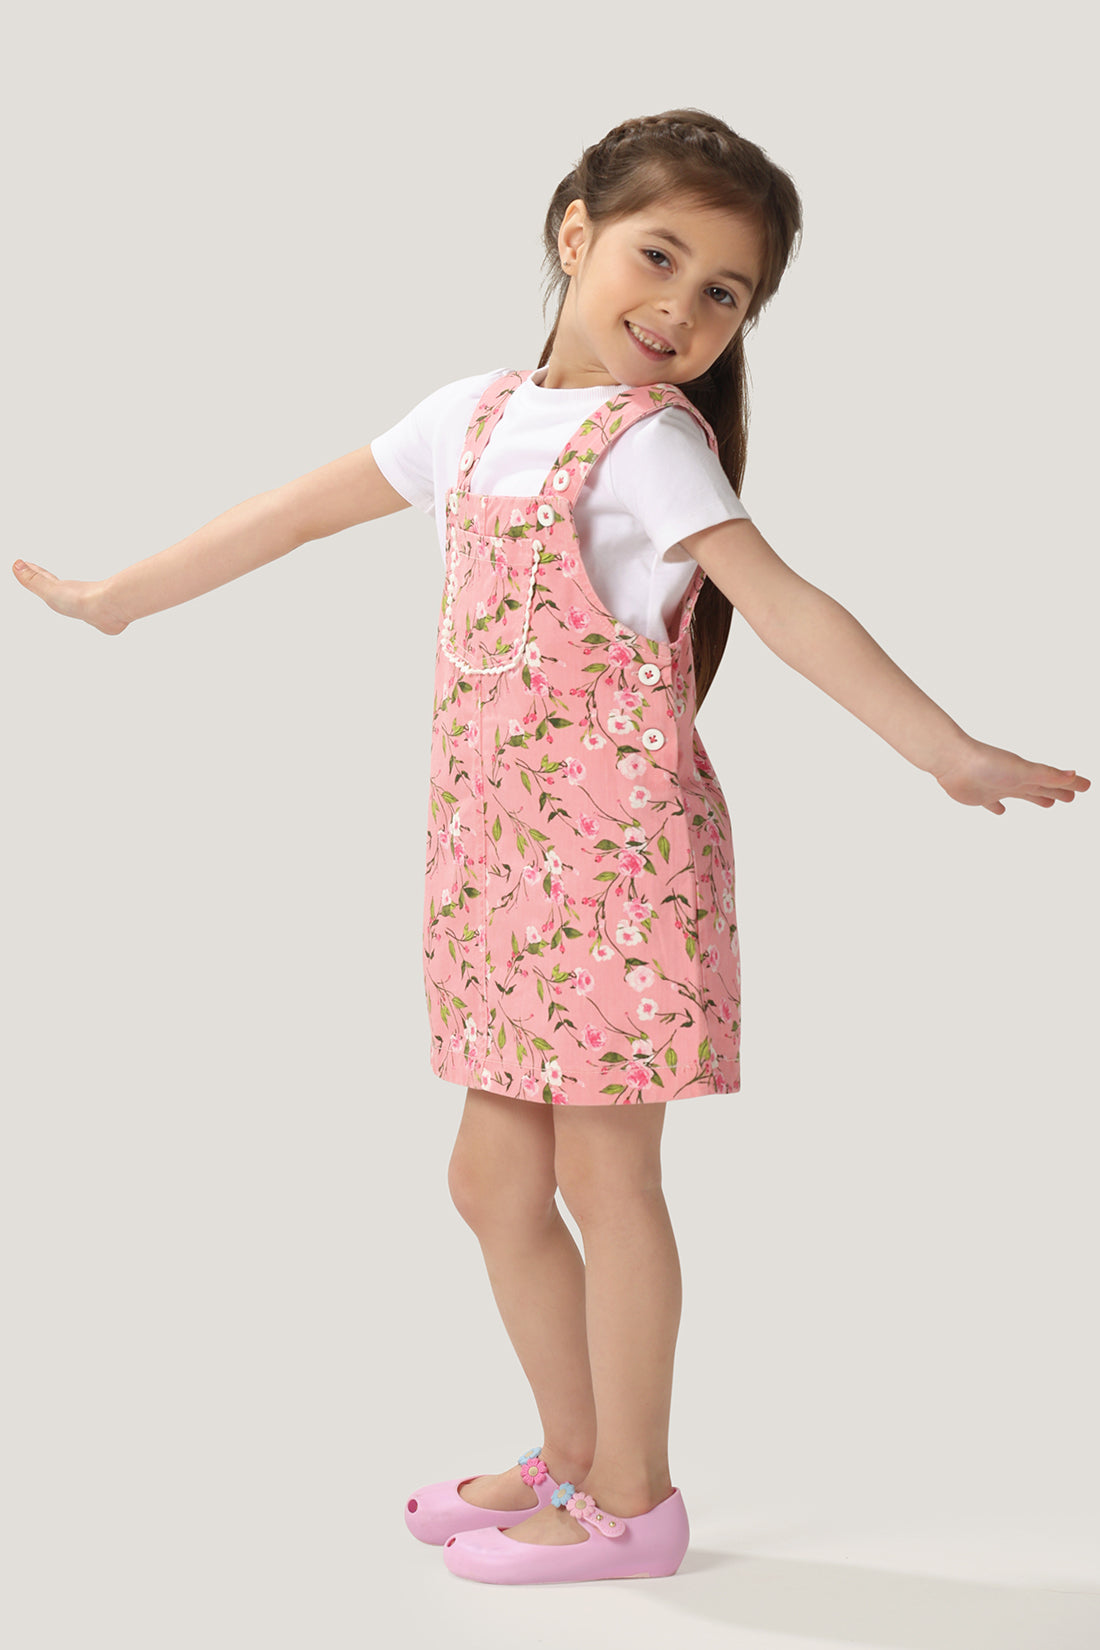 One Friday Baby Girls Pink Floral Printed Dungaree with White Tee